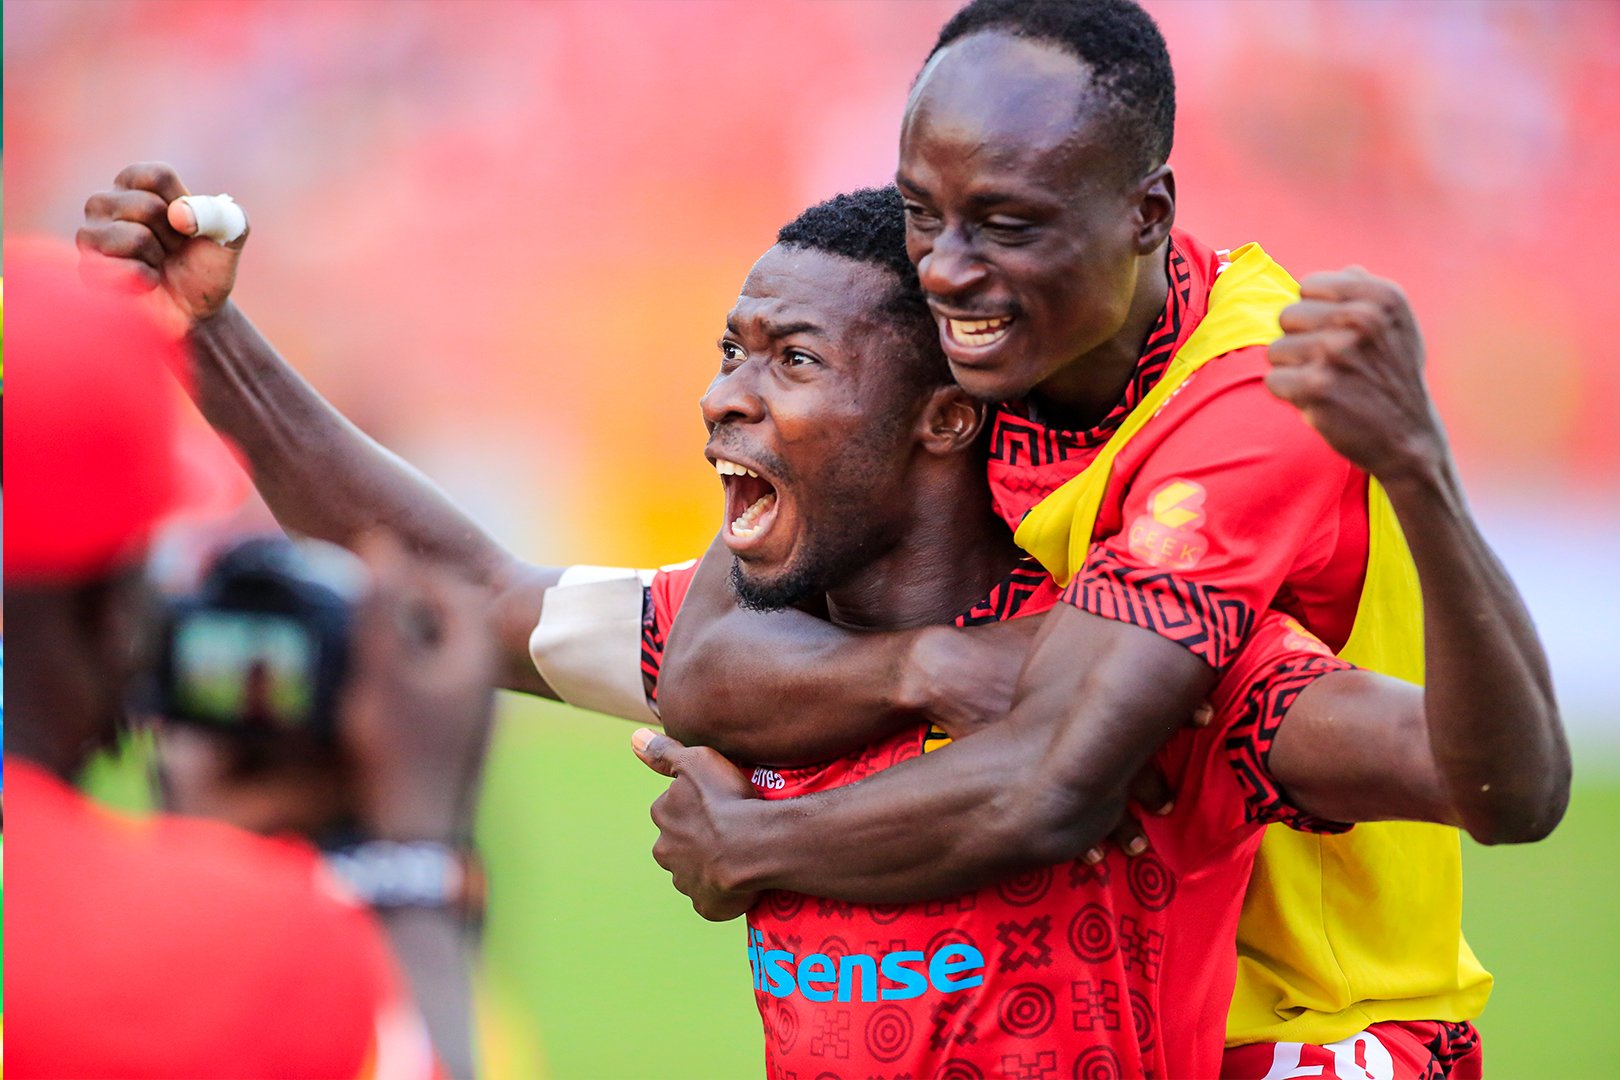 Asante Kotoko aim for points against Accra Lions on Saturday